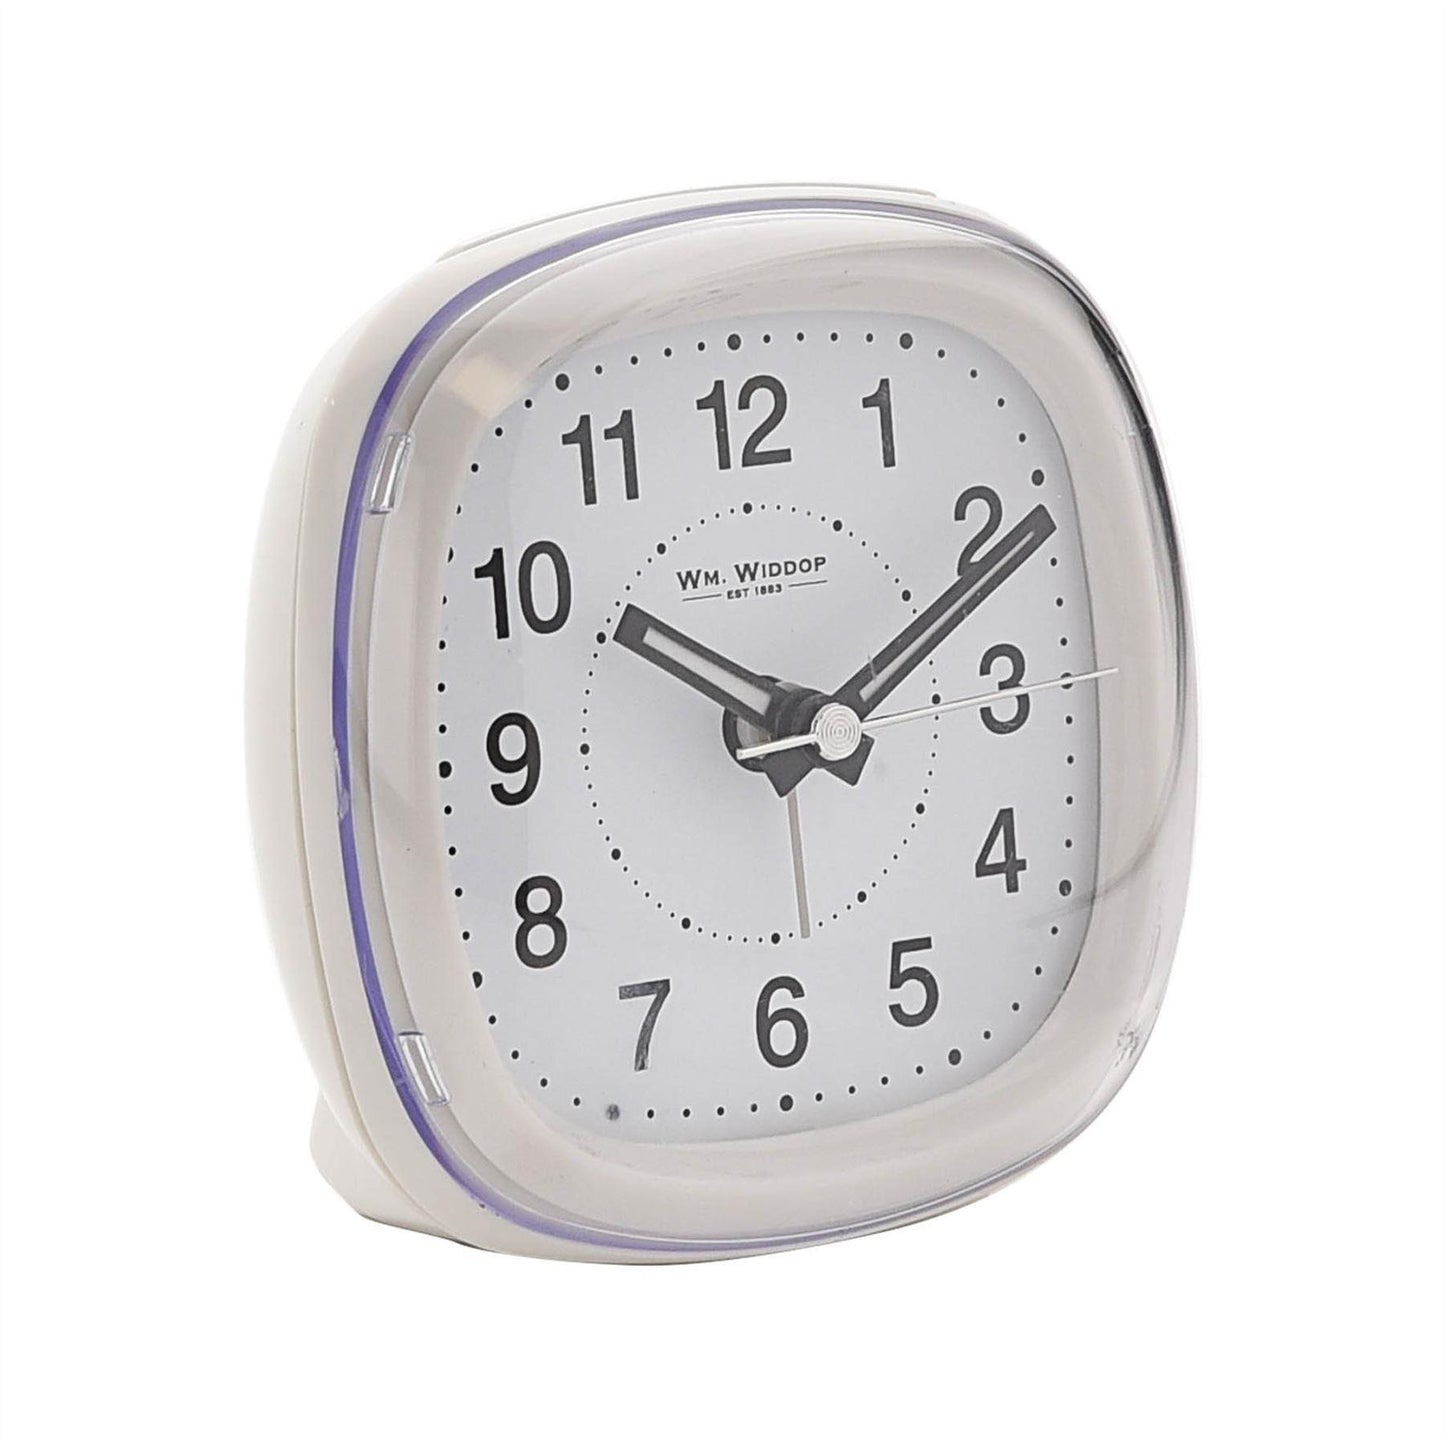 Wm Widdop Alarm Clock Dome Lens Sweep Snooze Light 5193 Available Multiple Colour